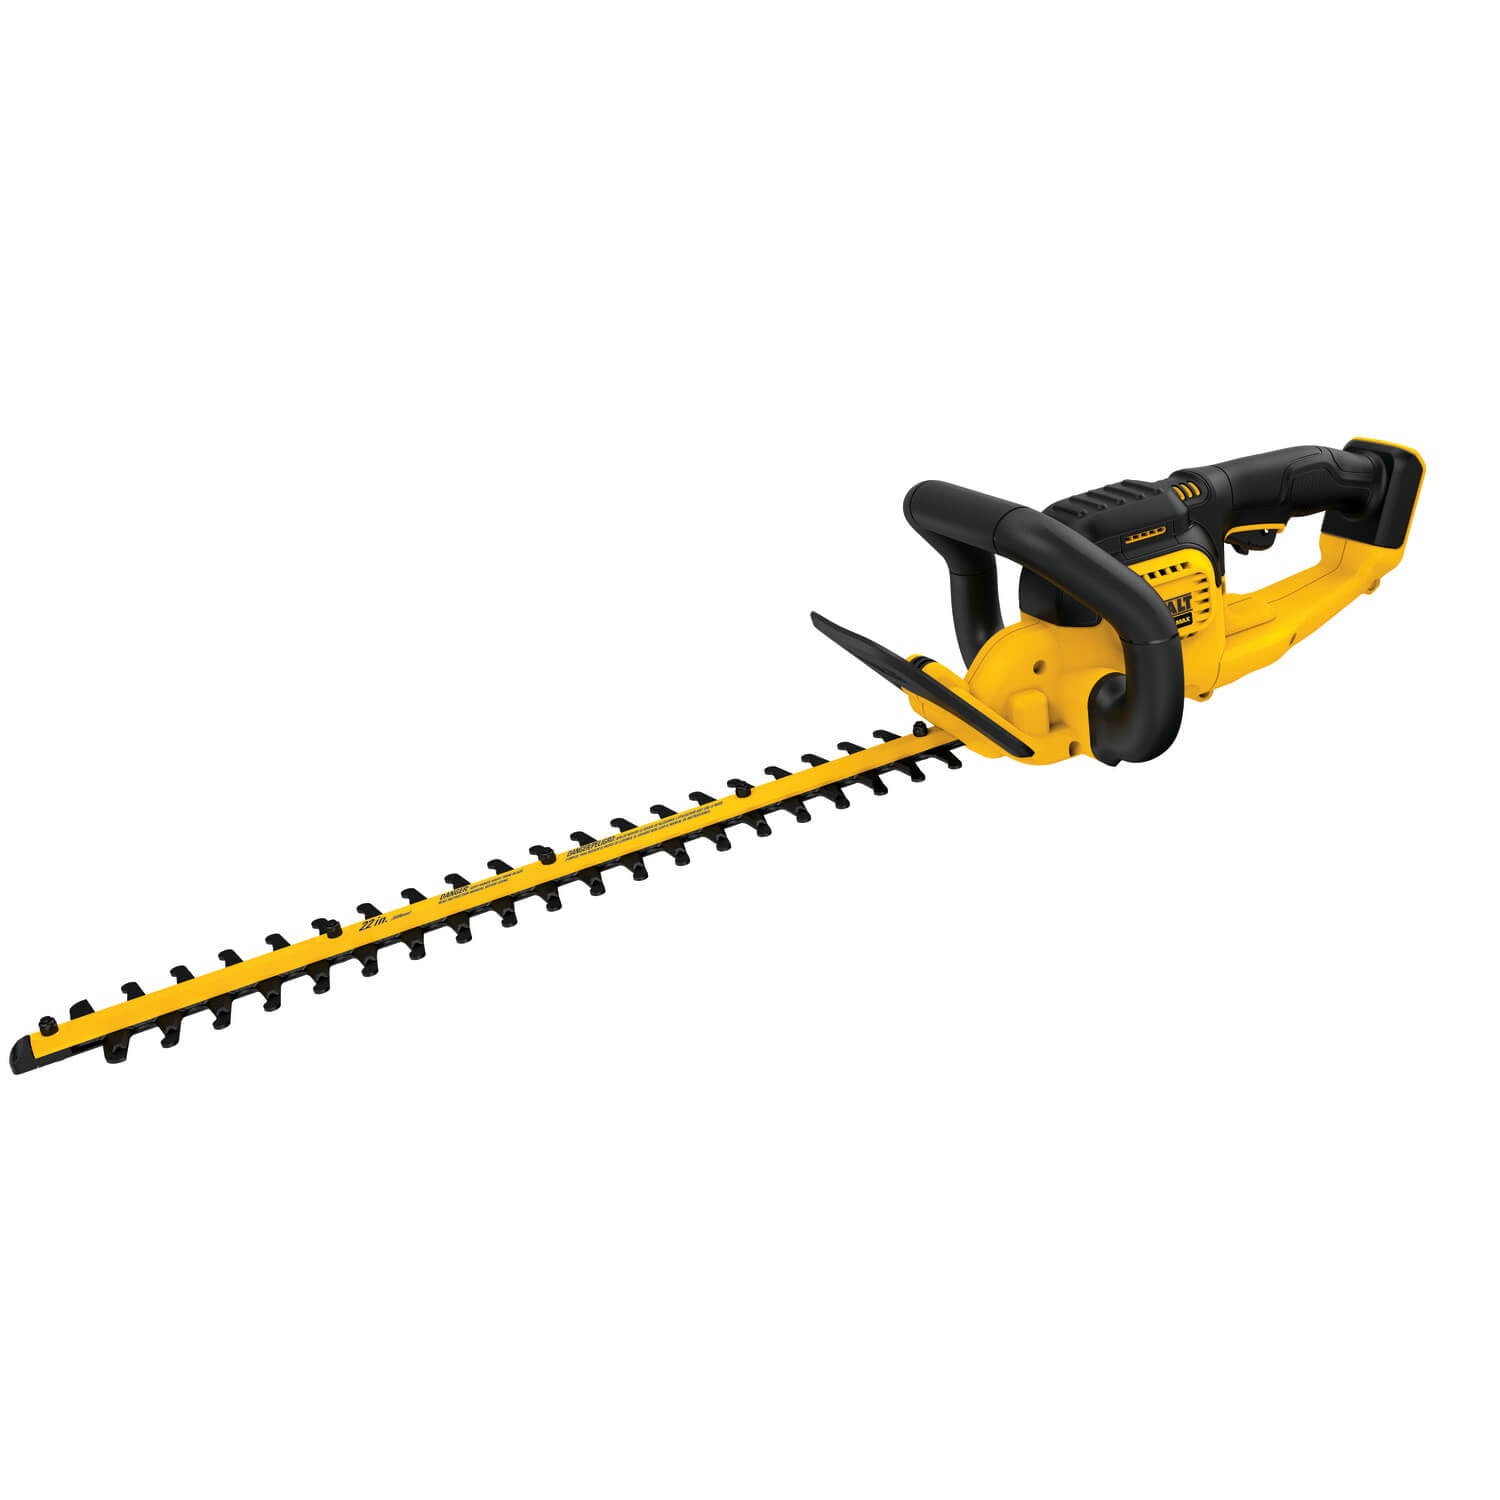 Dewalt DCHT820B - 20V MAX* LITHIUM ION 22” HEDGE TRIMMER - Tool Only - wise-line-tools